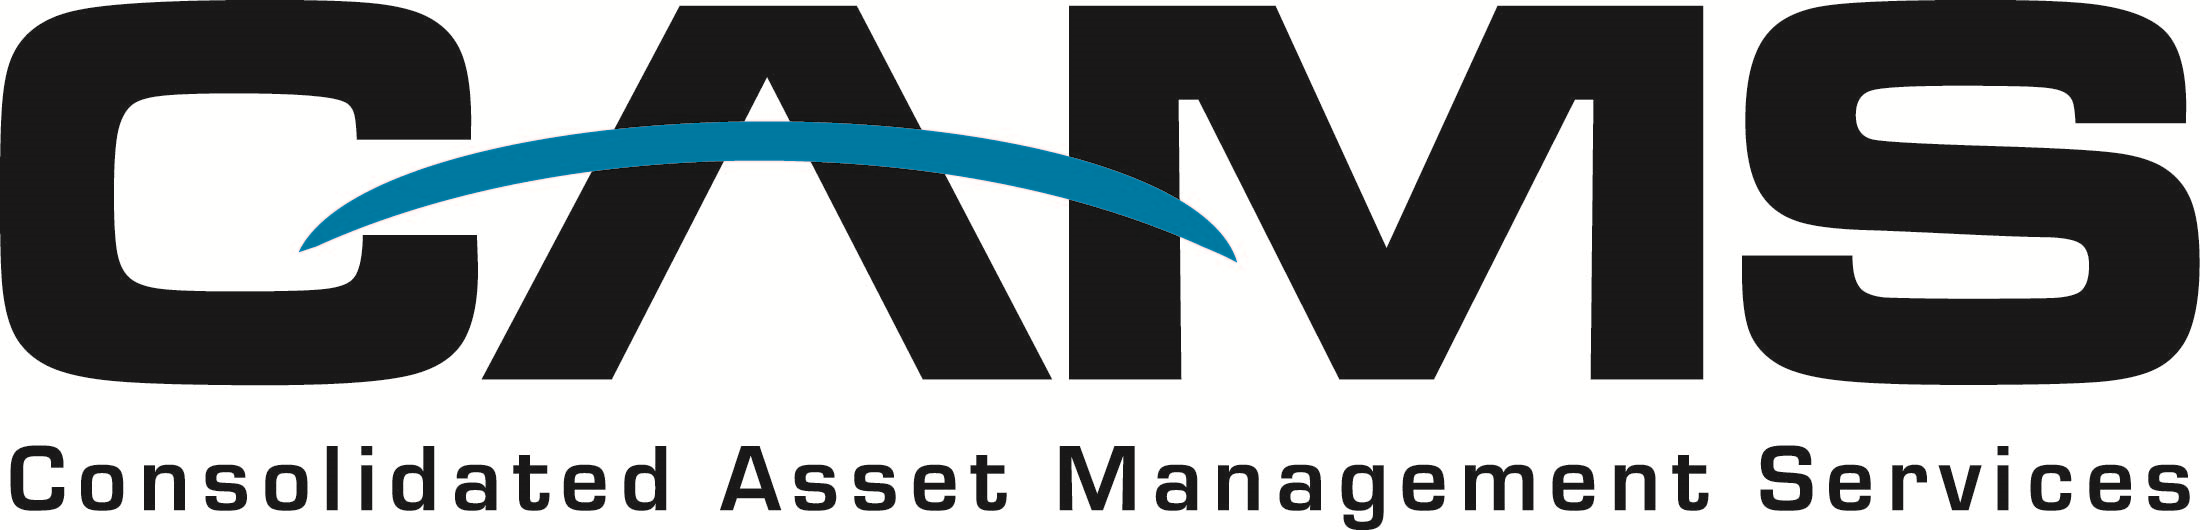 Consolidated Asset Management Services (CAMS) logo